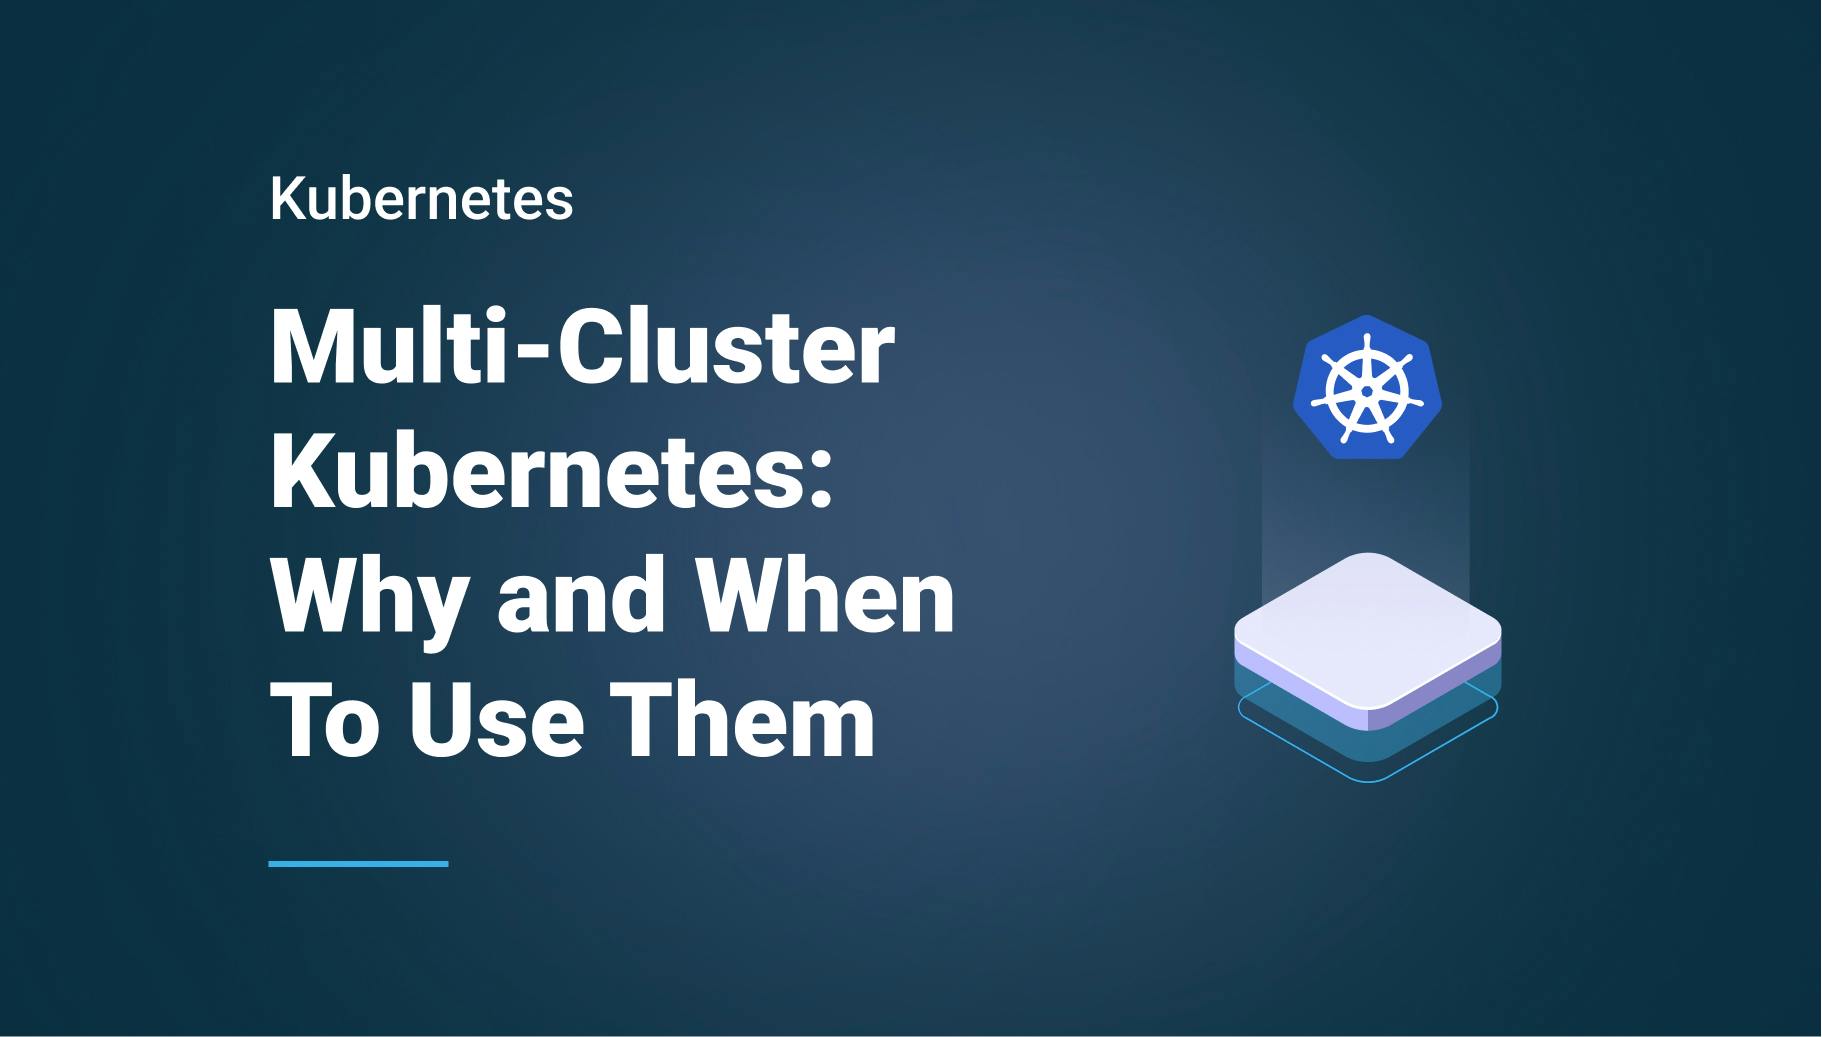 Kubernetes Multi-Cluster: Why and When To Use Them - Qovery